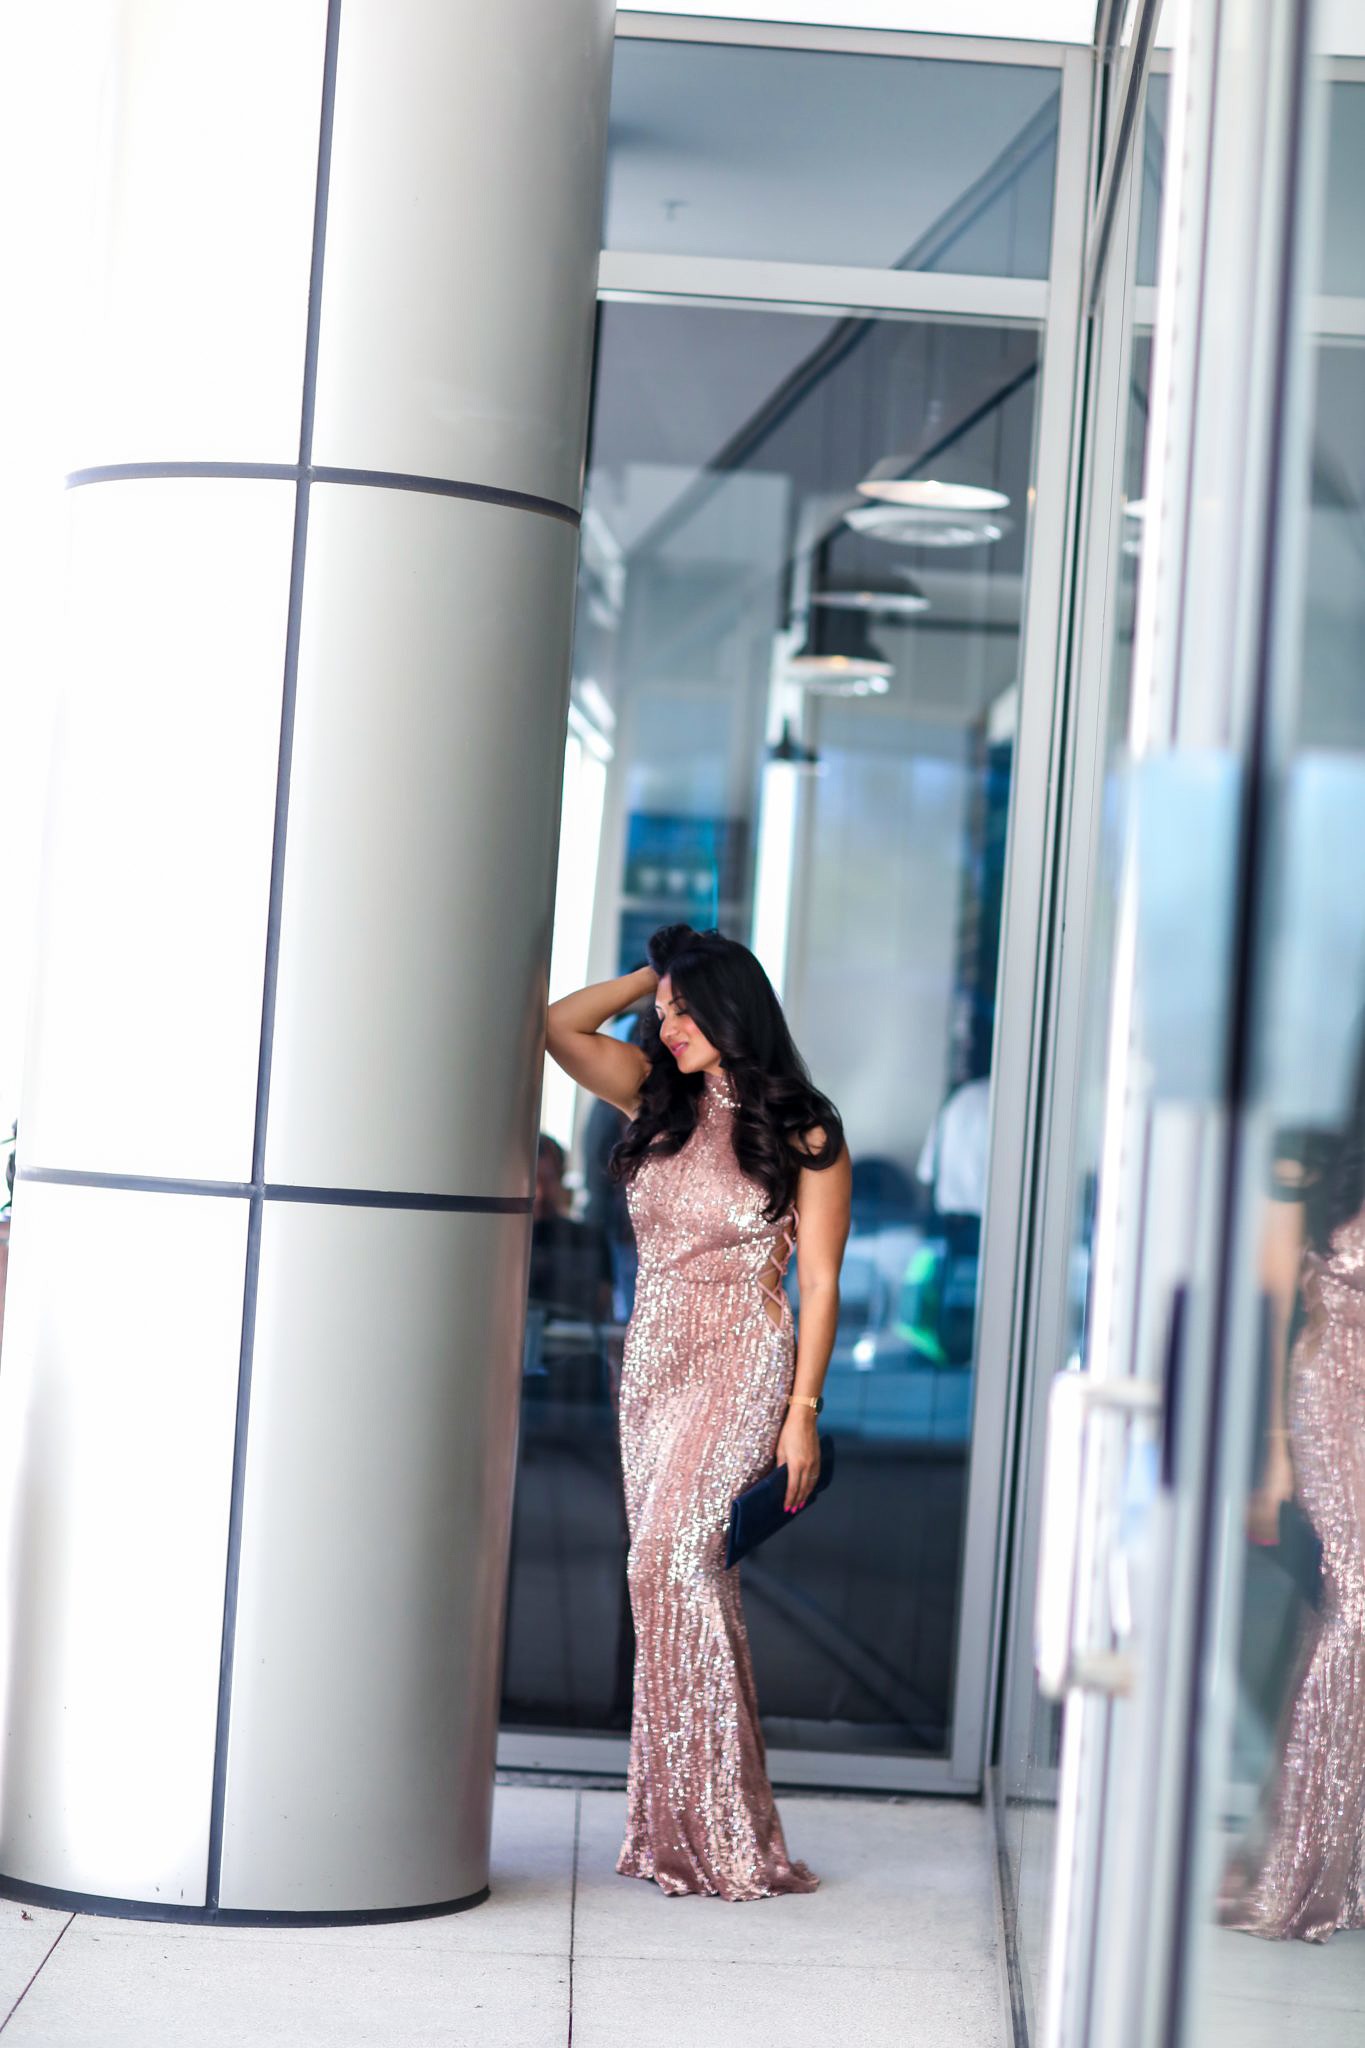 Sequin Maxi Dress. Rose Gold Bodycon Maxi Dress from Pretty Missy - Sequin Maxi Dress. Rose Gold Bodycon Maxi Dress from Pretty Missy by popular Orange County fashion blogger To Thine Own Style Be True